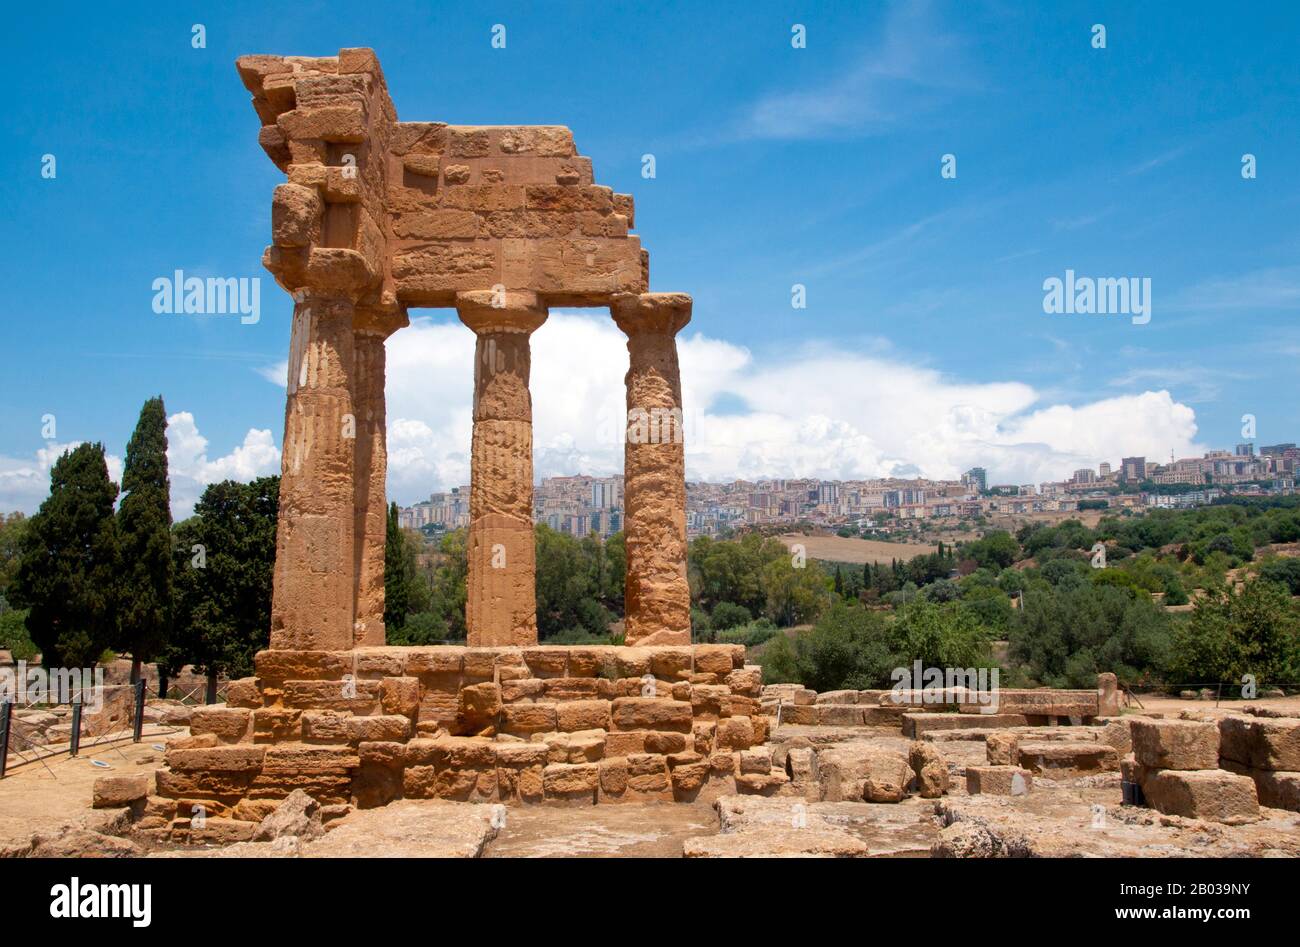 Agrigento was founded on a plateau overlooking the sea, with two nearby rivers, the Hypsas and the Akragas, and a ridge to the north offering a degree of natural fortification. Its establishment took place around 582–580 BCE and is attributed to Greek colonists from Gela, who named it 'Akragas'.  Akragas grew rapidly, becoming one of the richest and most famous of the Greek colonies of Magna Graecia (Greater Greece). It came to prominence under the 6th-century tyrants Phalaris and Theron, and became a democracy after the overthrow of Theron's son Thrasydaeus.  Although the city remained neutra Stock Photo